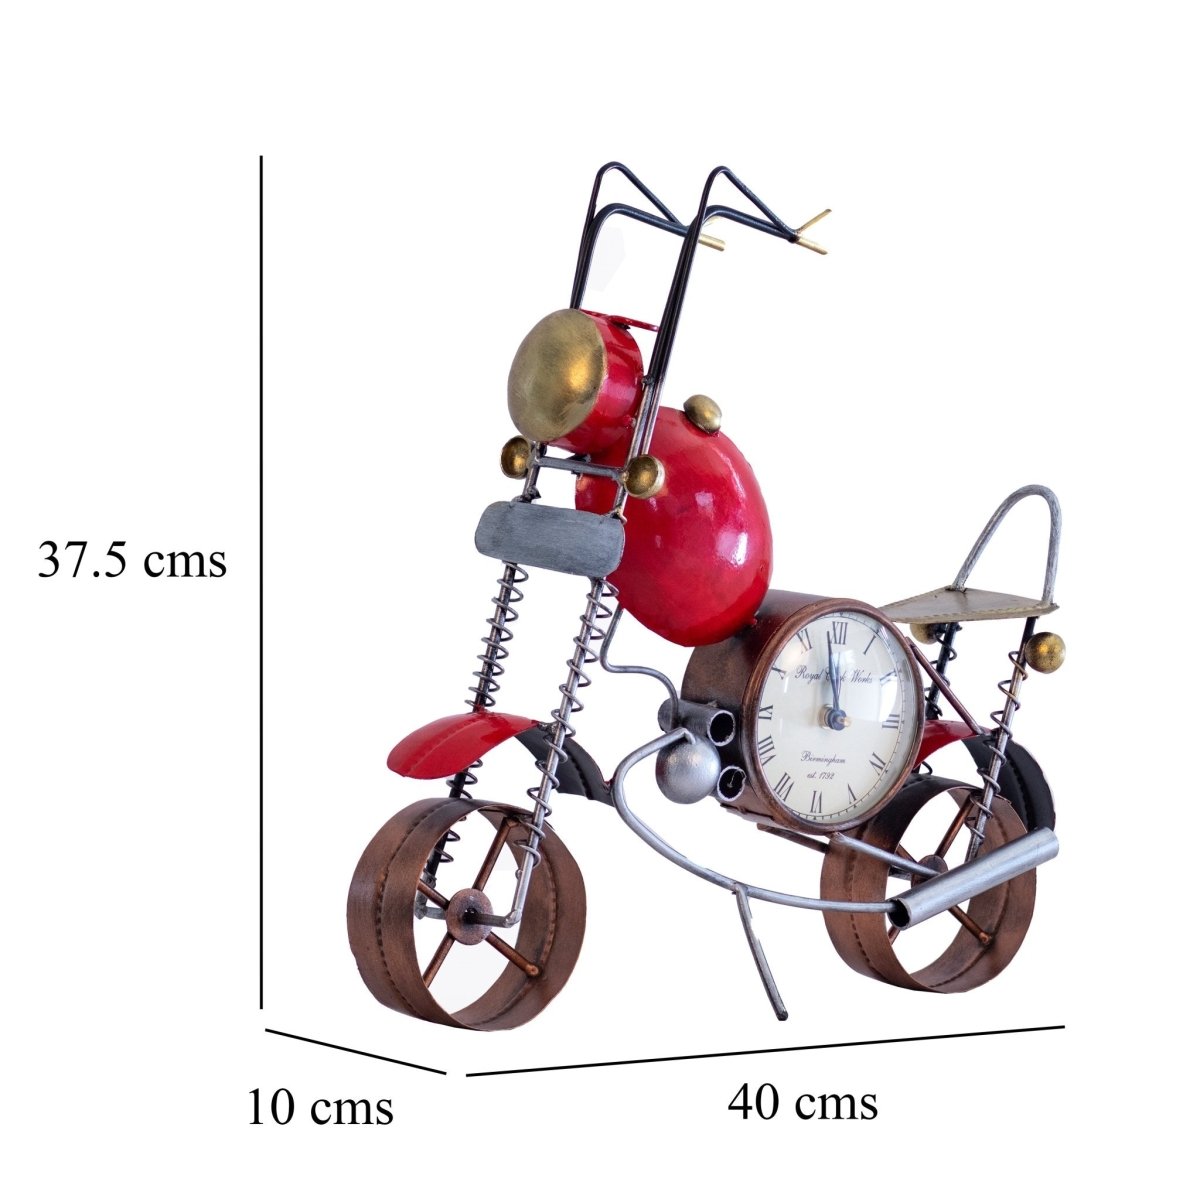 Kezevel Metal Bike with Watch Table Decor - Handcrafted Bike Table Decorative in Red Bronze Finish, Metal Showpieces for Home Decor, Size 40X10X37.5CM - Kezevel